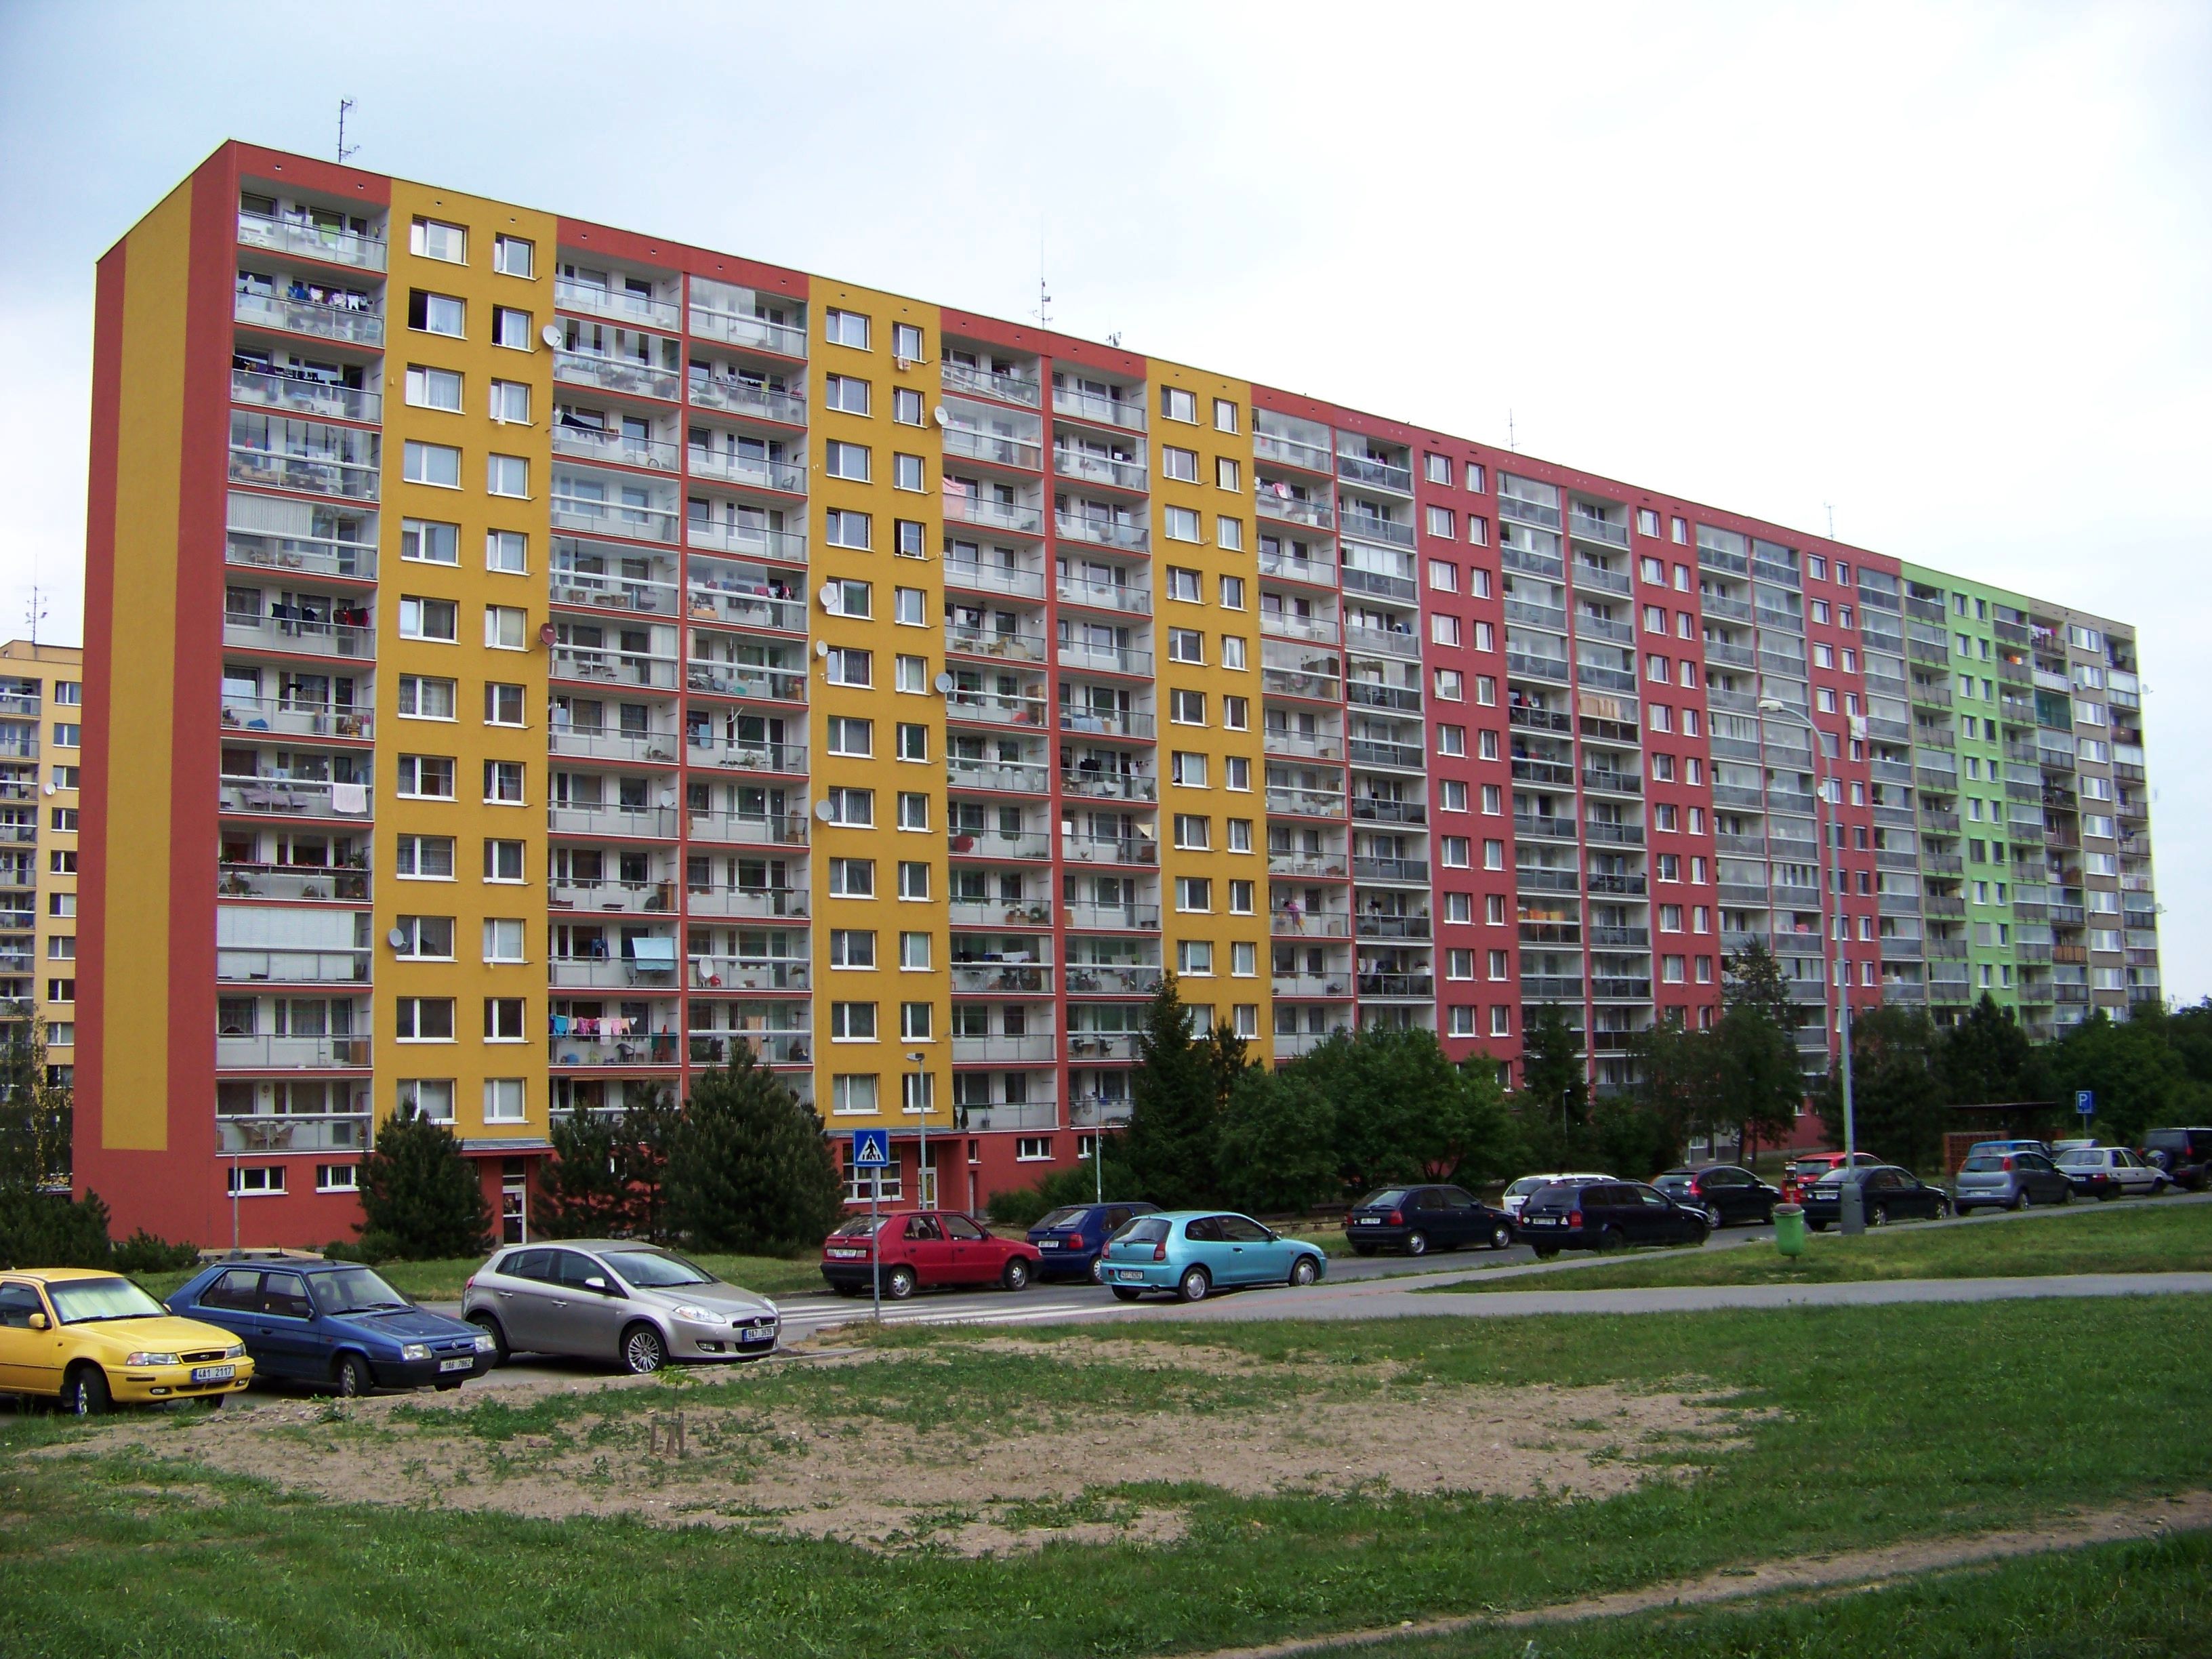 Acommodation in Prague, outskirts of Prague. Typical communist architecture called "panelák". Block of flats.